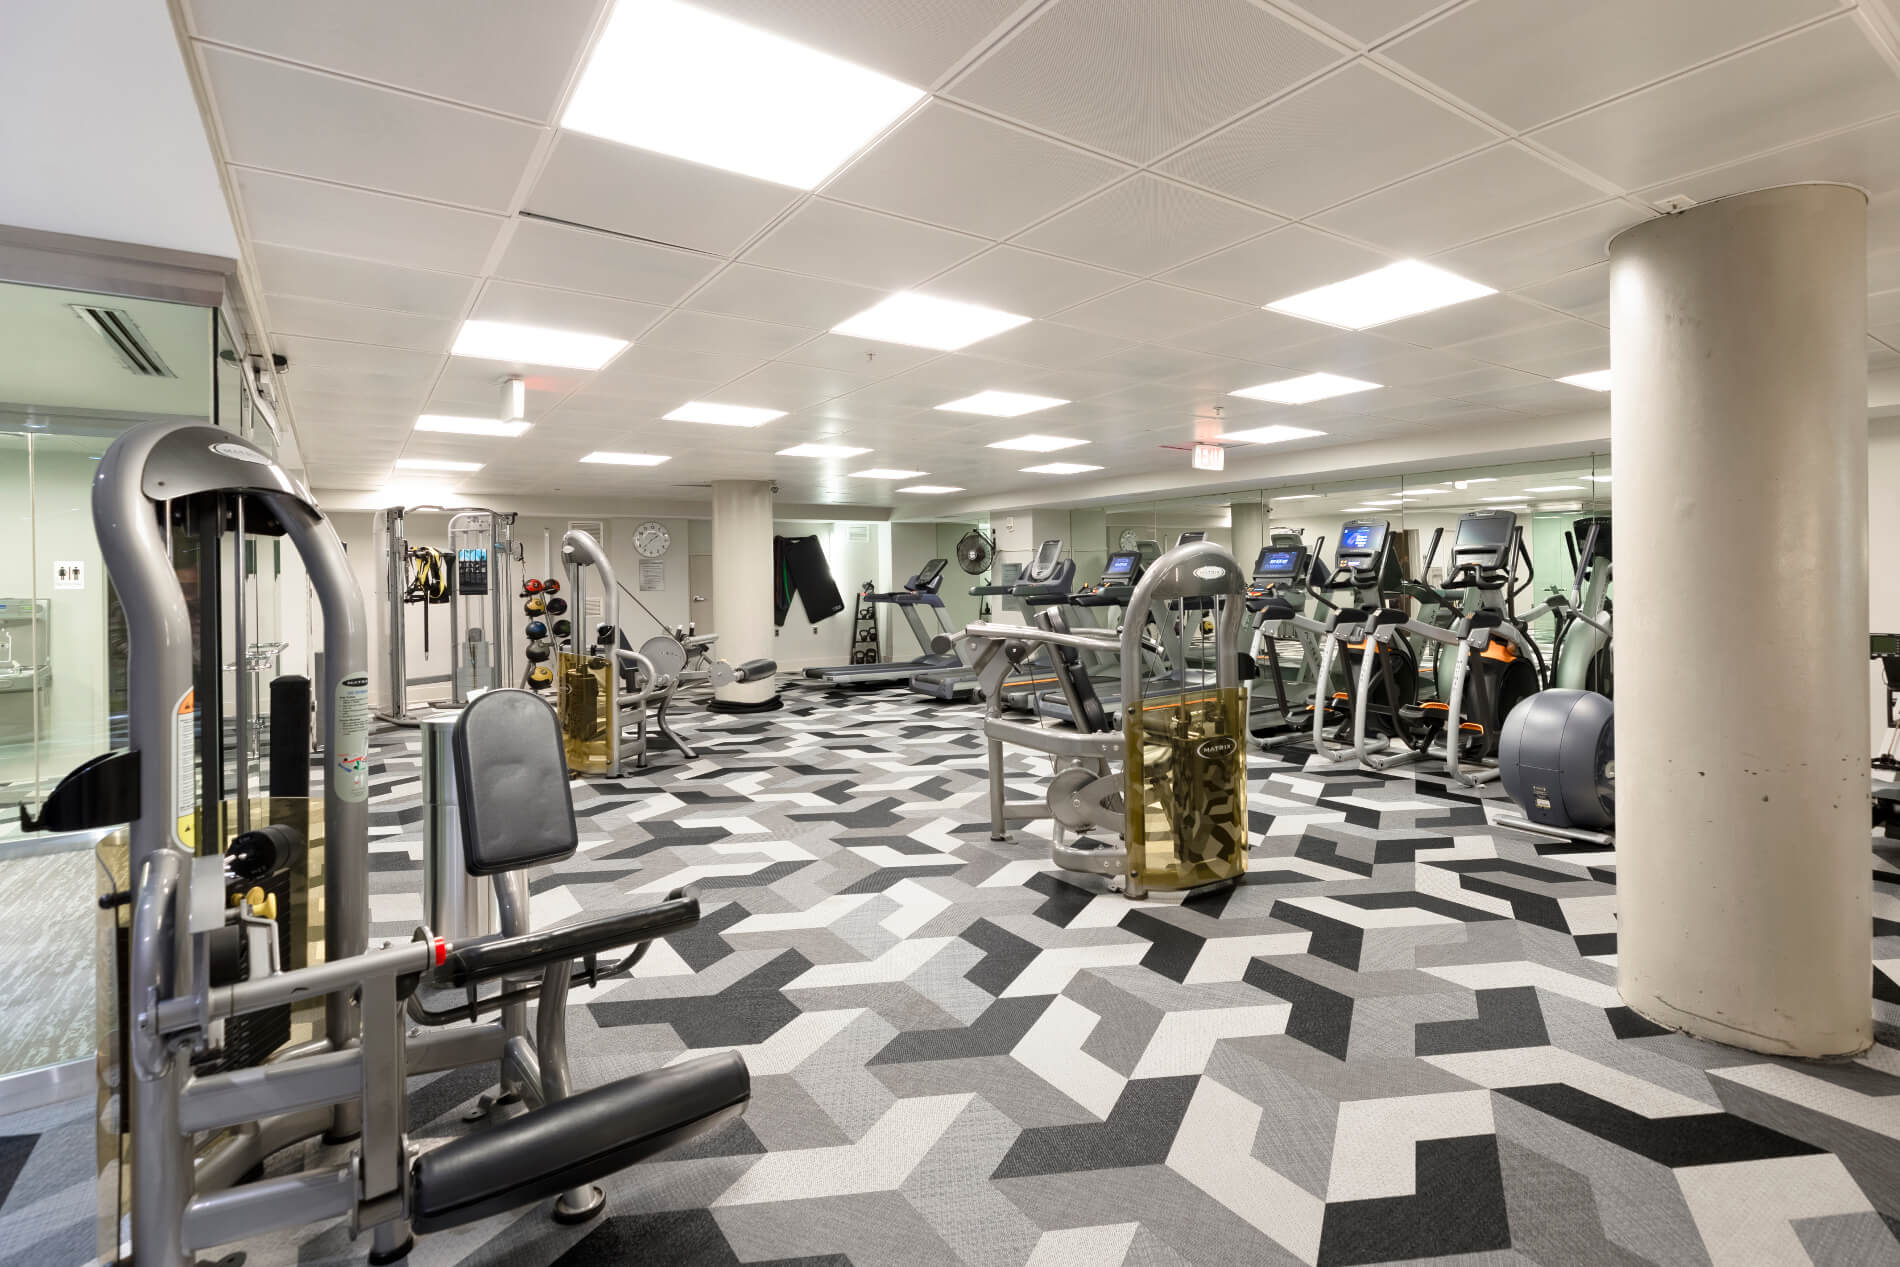 Gym with workout equipment, ceiling lights and patterned flooring